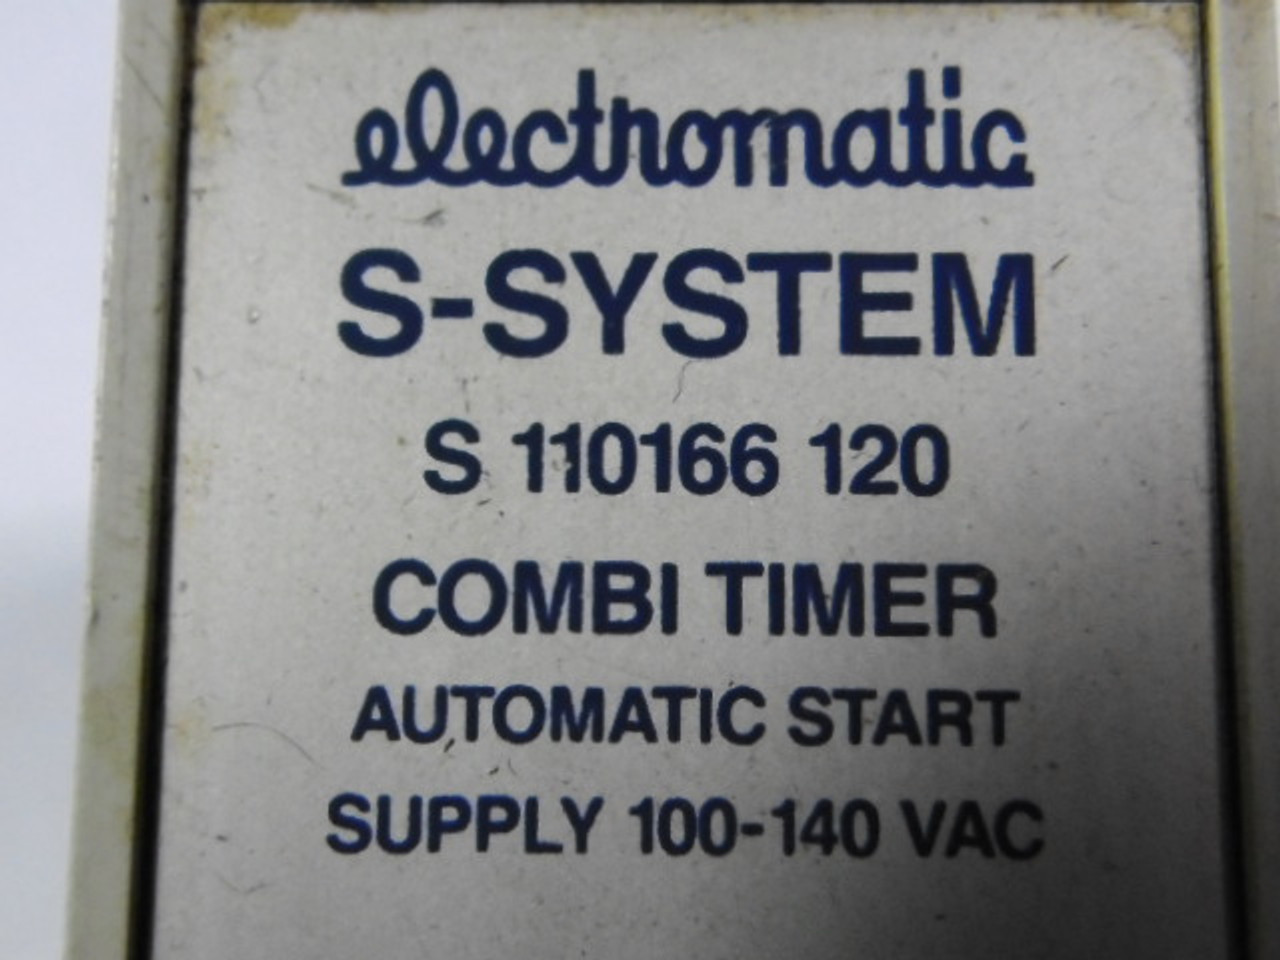 Electromatic S-110166-120 S-System Combi Timer 100-140V AC 5-100 Time USED